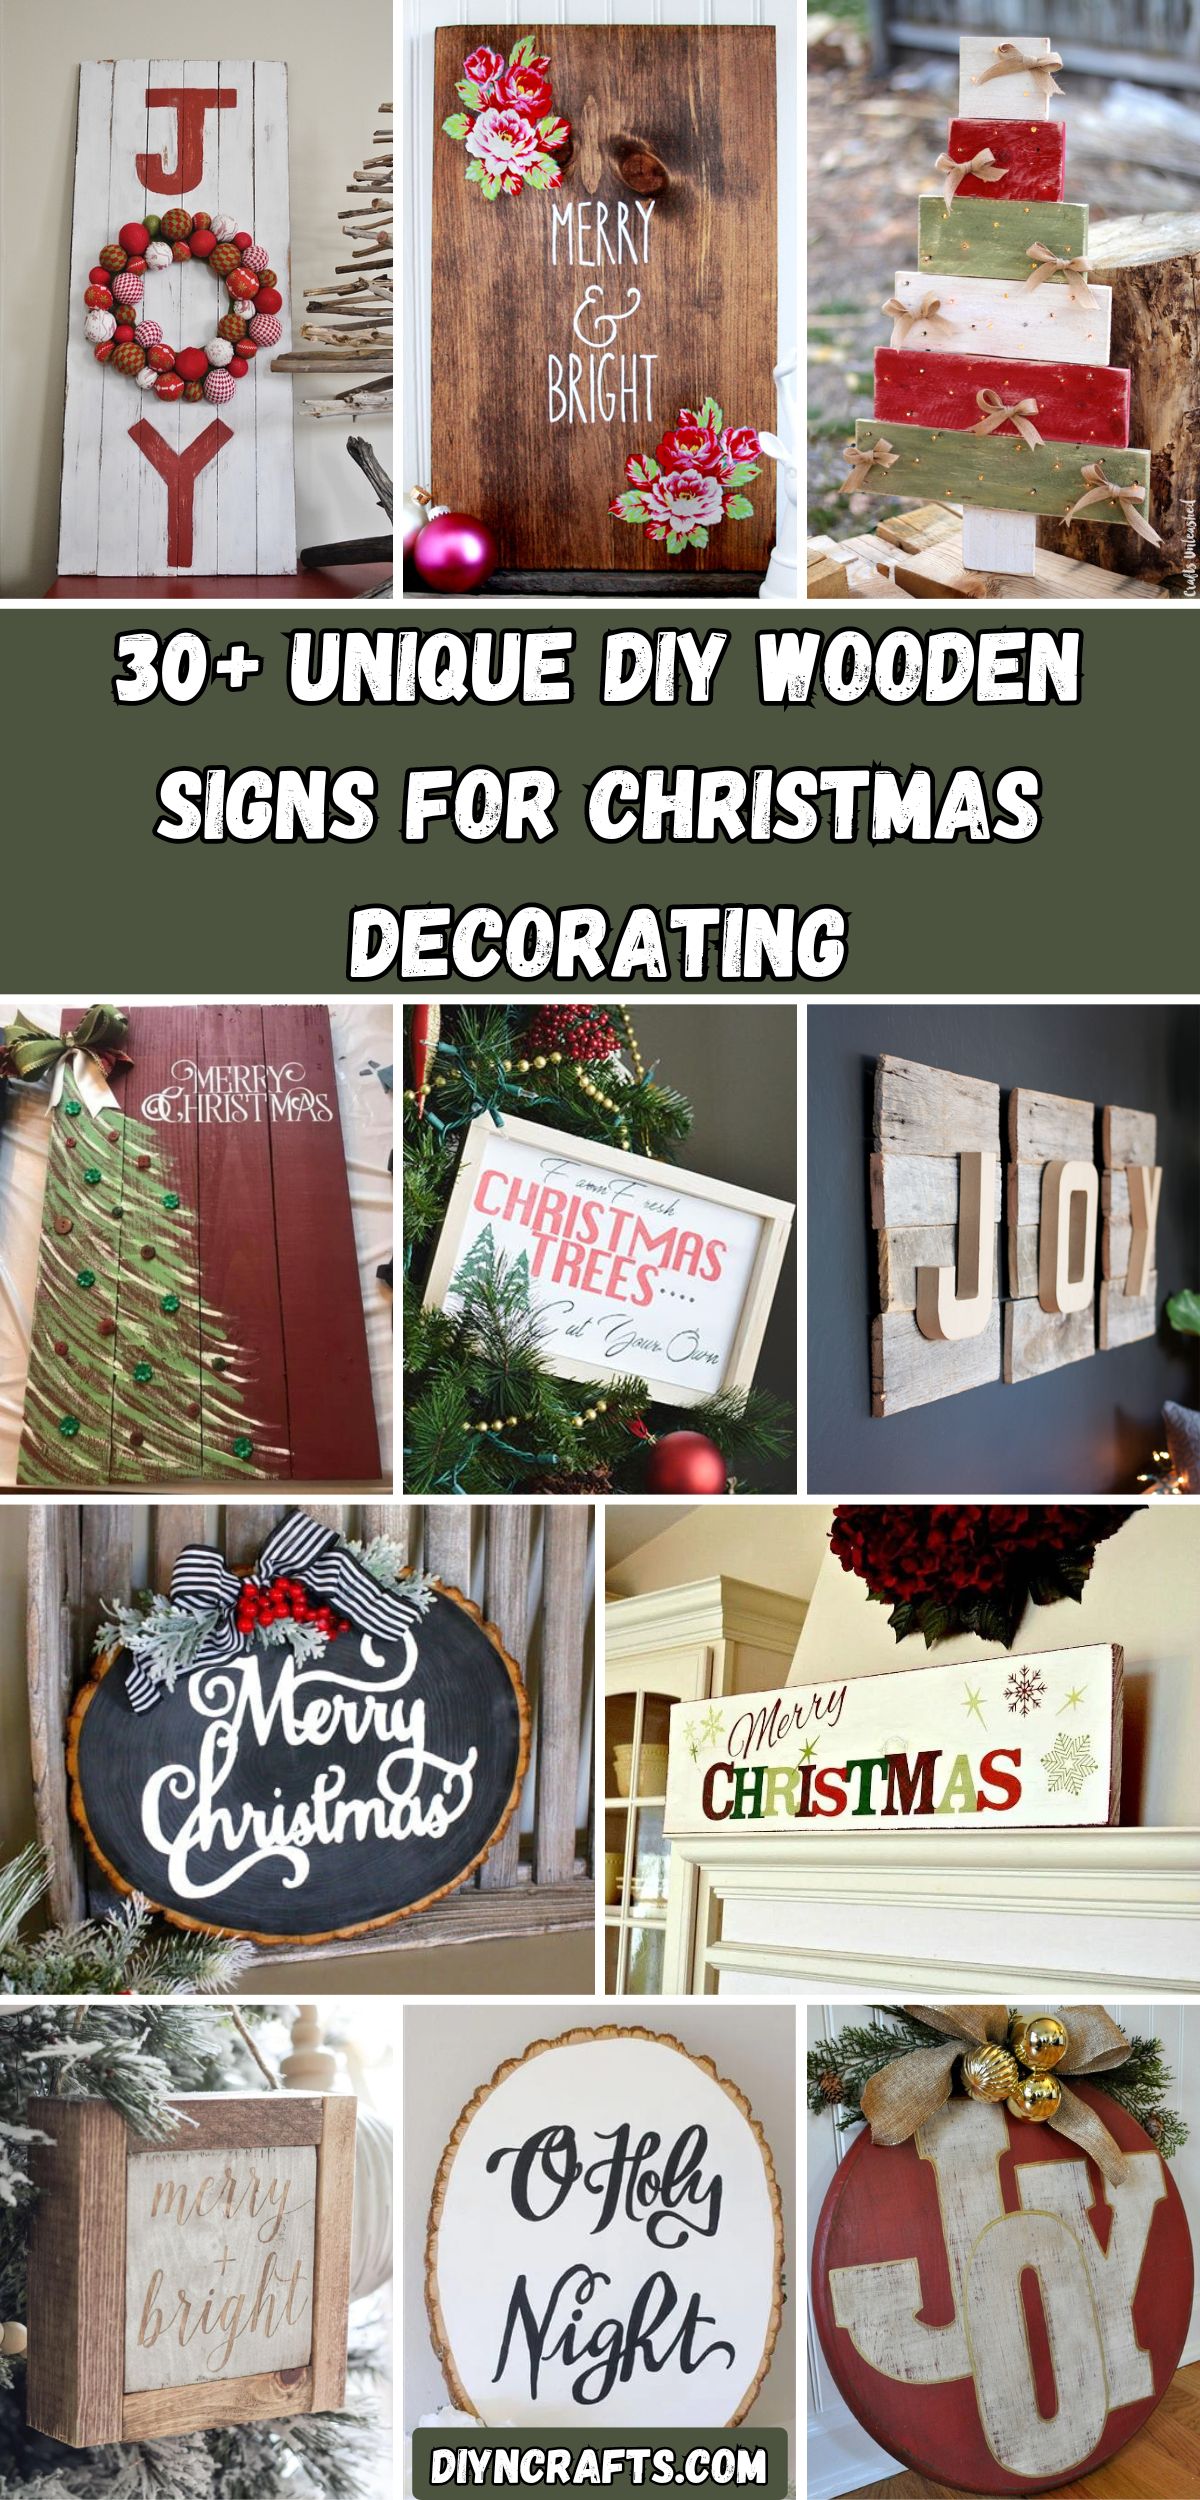 30+ Unique DIY Wooden Signs For Christmas Decorating collage.